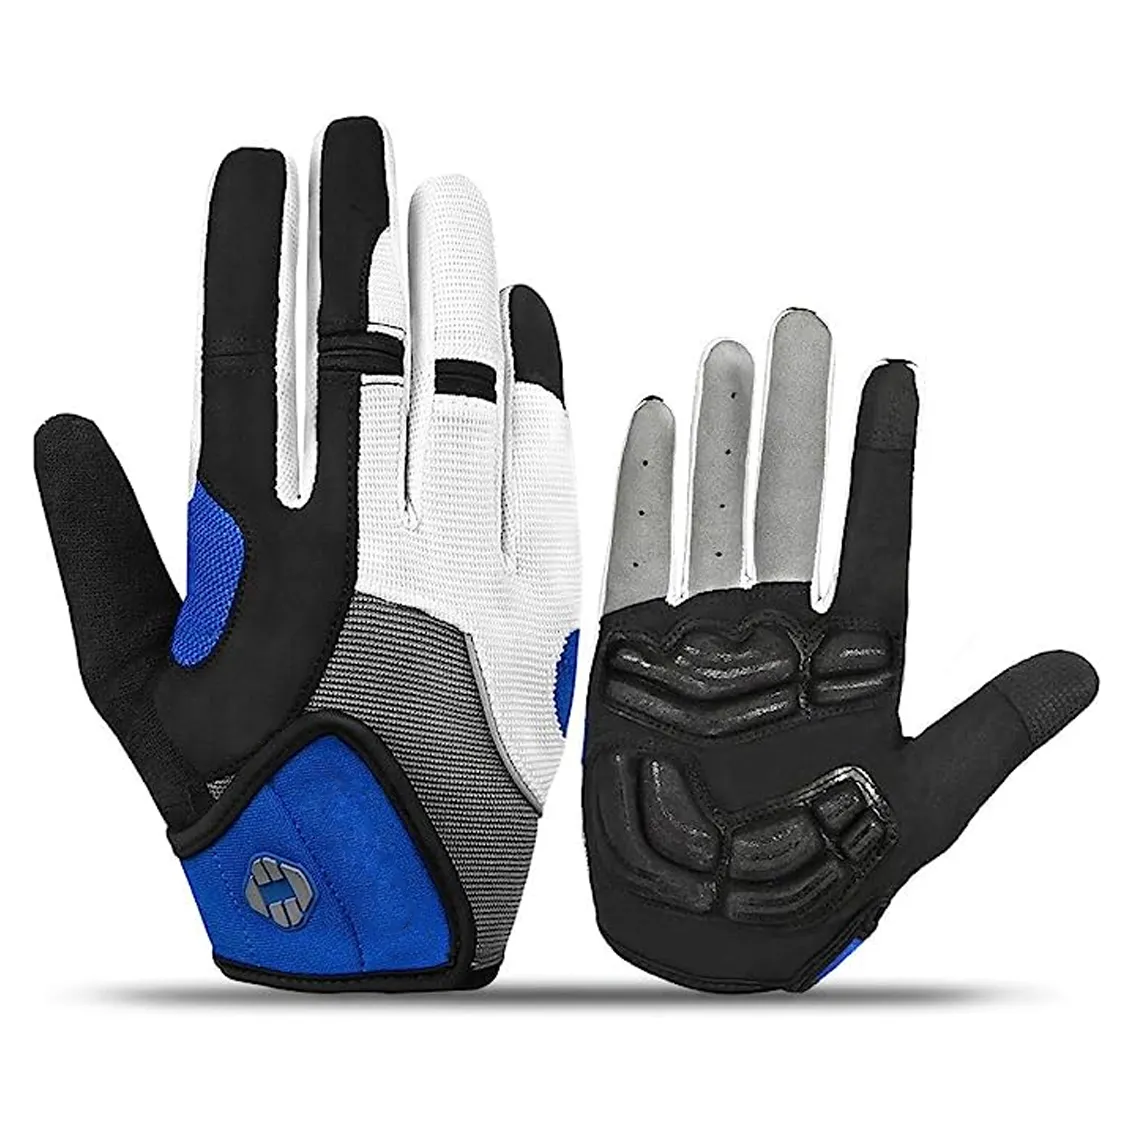 Gloves Exercise Fitness Training Cycling Sports Gloves Breathable Fishing Outdoor Cycling Gloves Motorcycle Off-road Racing